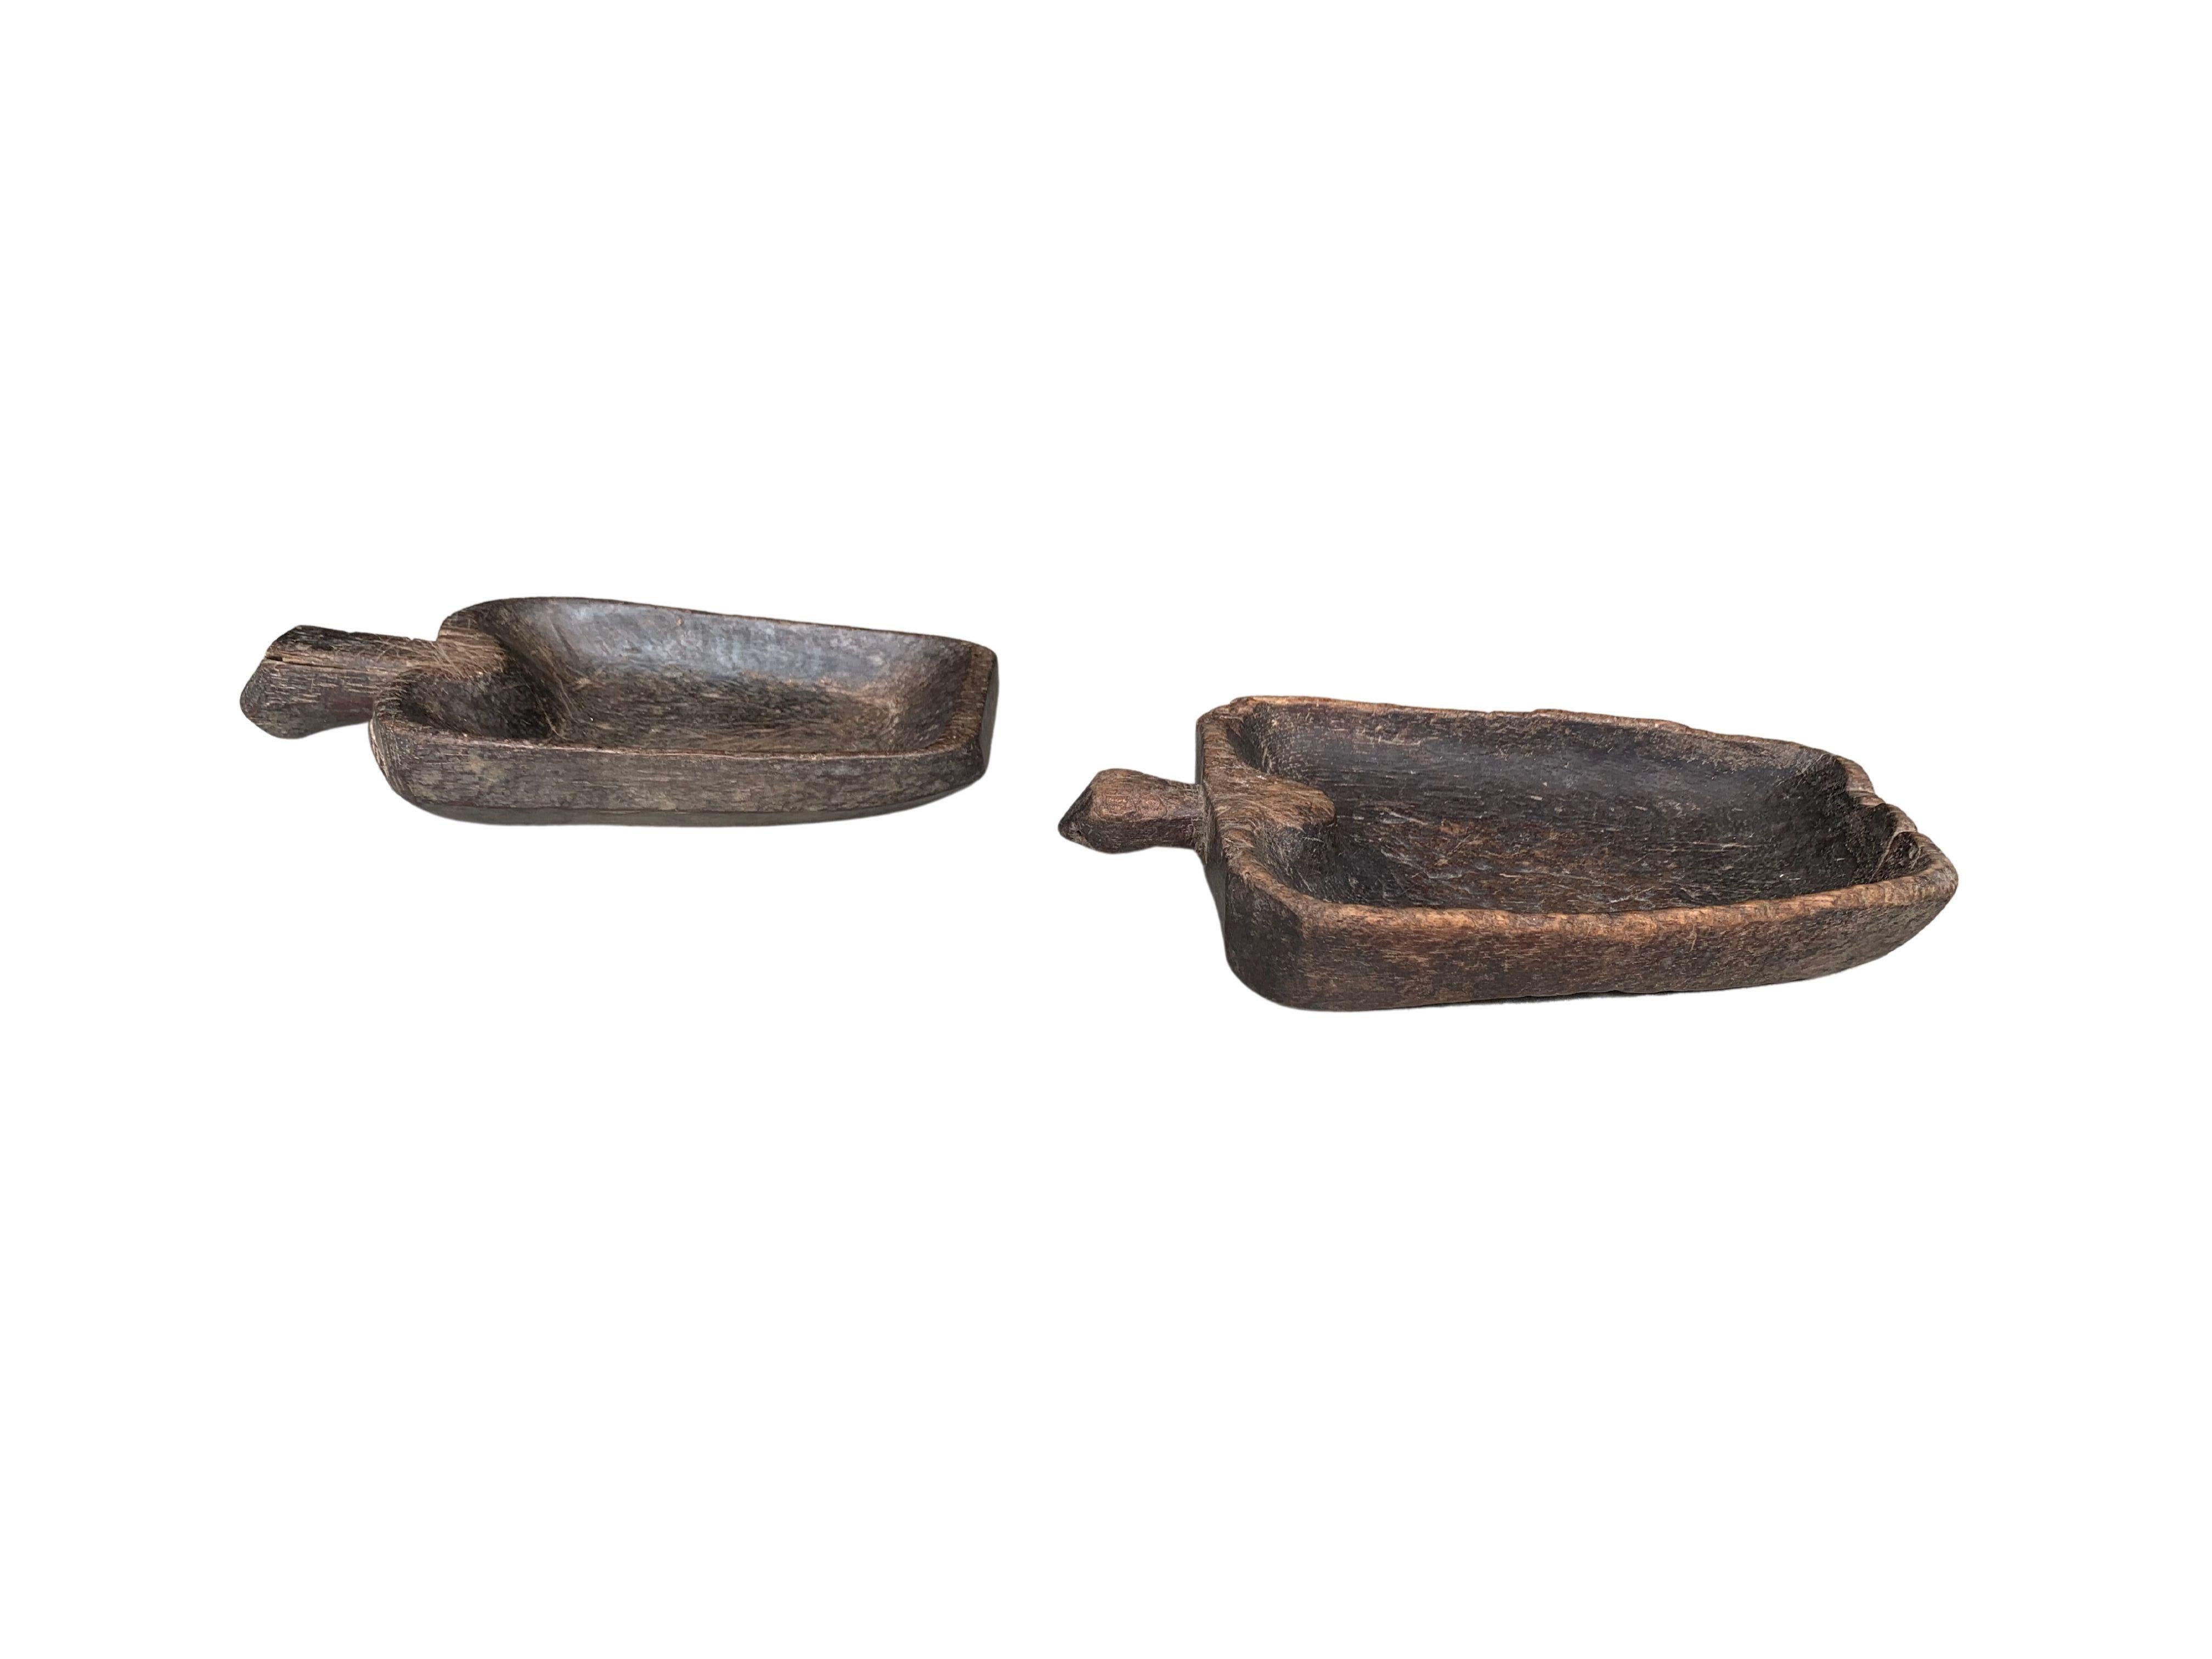 Crafted from ironwood these Mentawai tribal bowls feature handles and subtle wood detailing. Wonderful decorative bowls or table centrepieces certain to invoke conversation. The Mentawai tribes are situated on a series of islands off the western